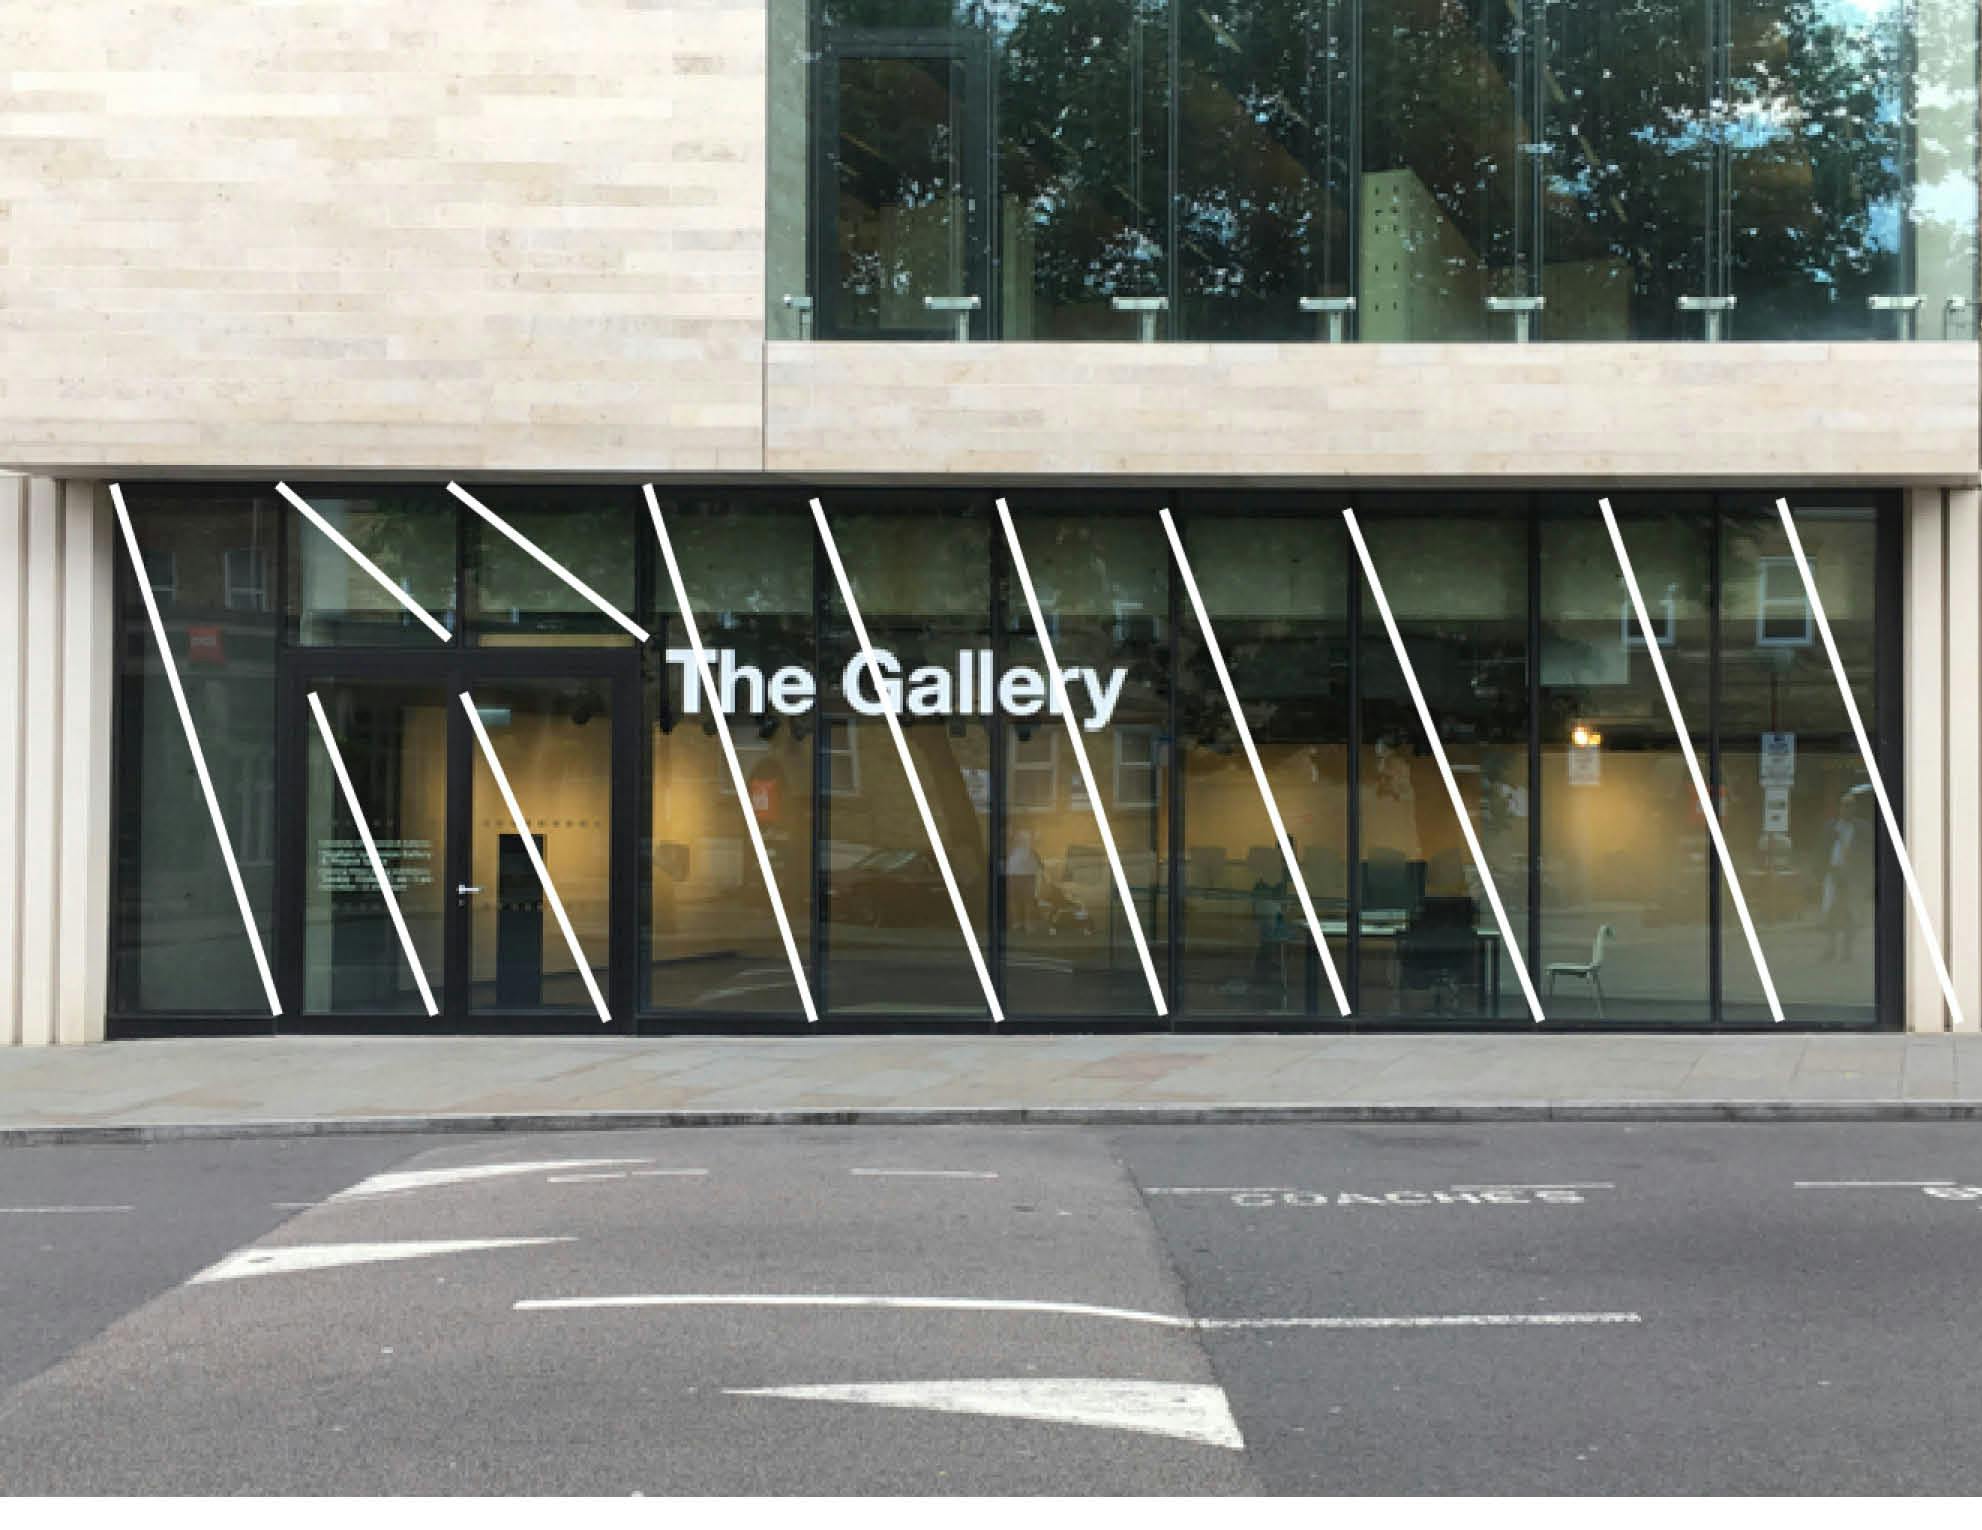 'Telon', vinyl artwork by Henry Coleman installed for the exhibition Plan-Unplan Stephen Lawrence Gallery Greenwich, London, diagonal vinyl strips run diagonally right to left  from corner to corner of each pain of glass across the face of the gallery